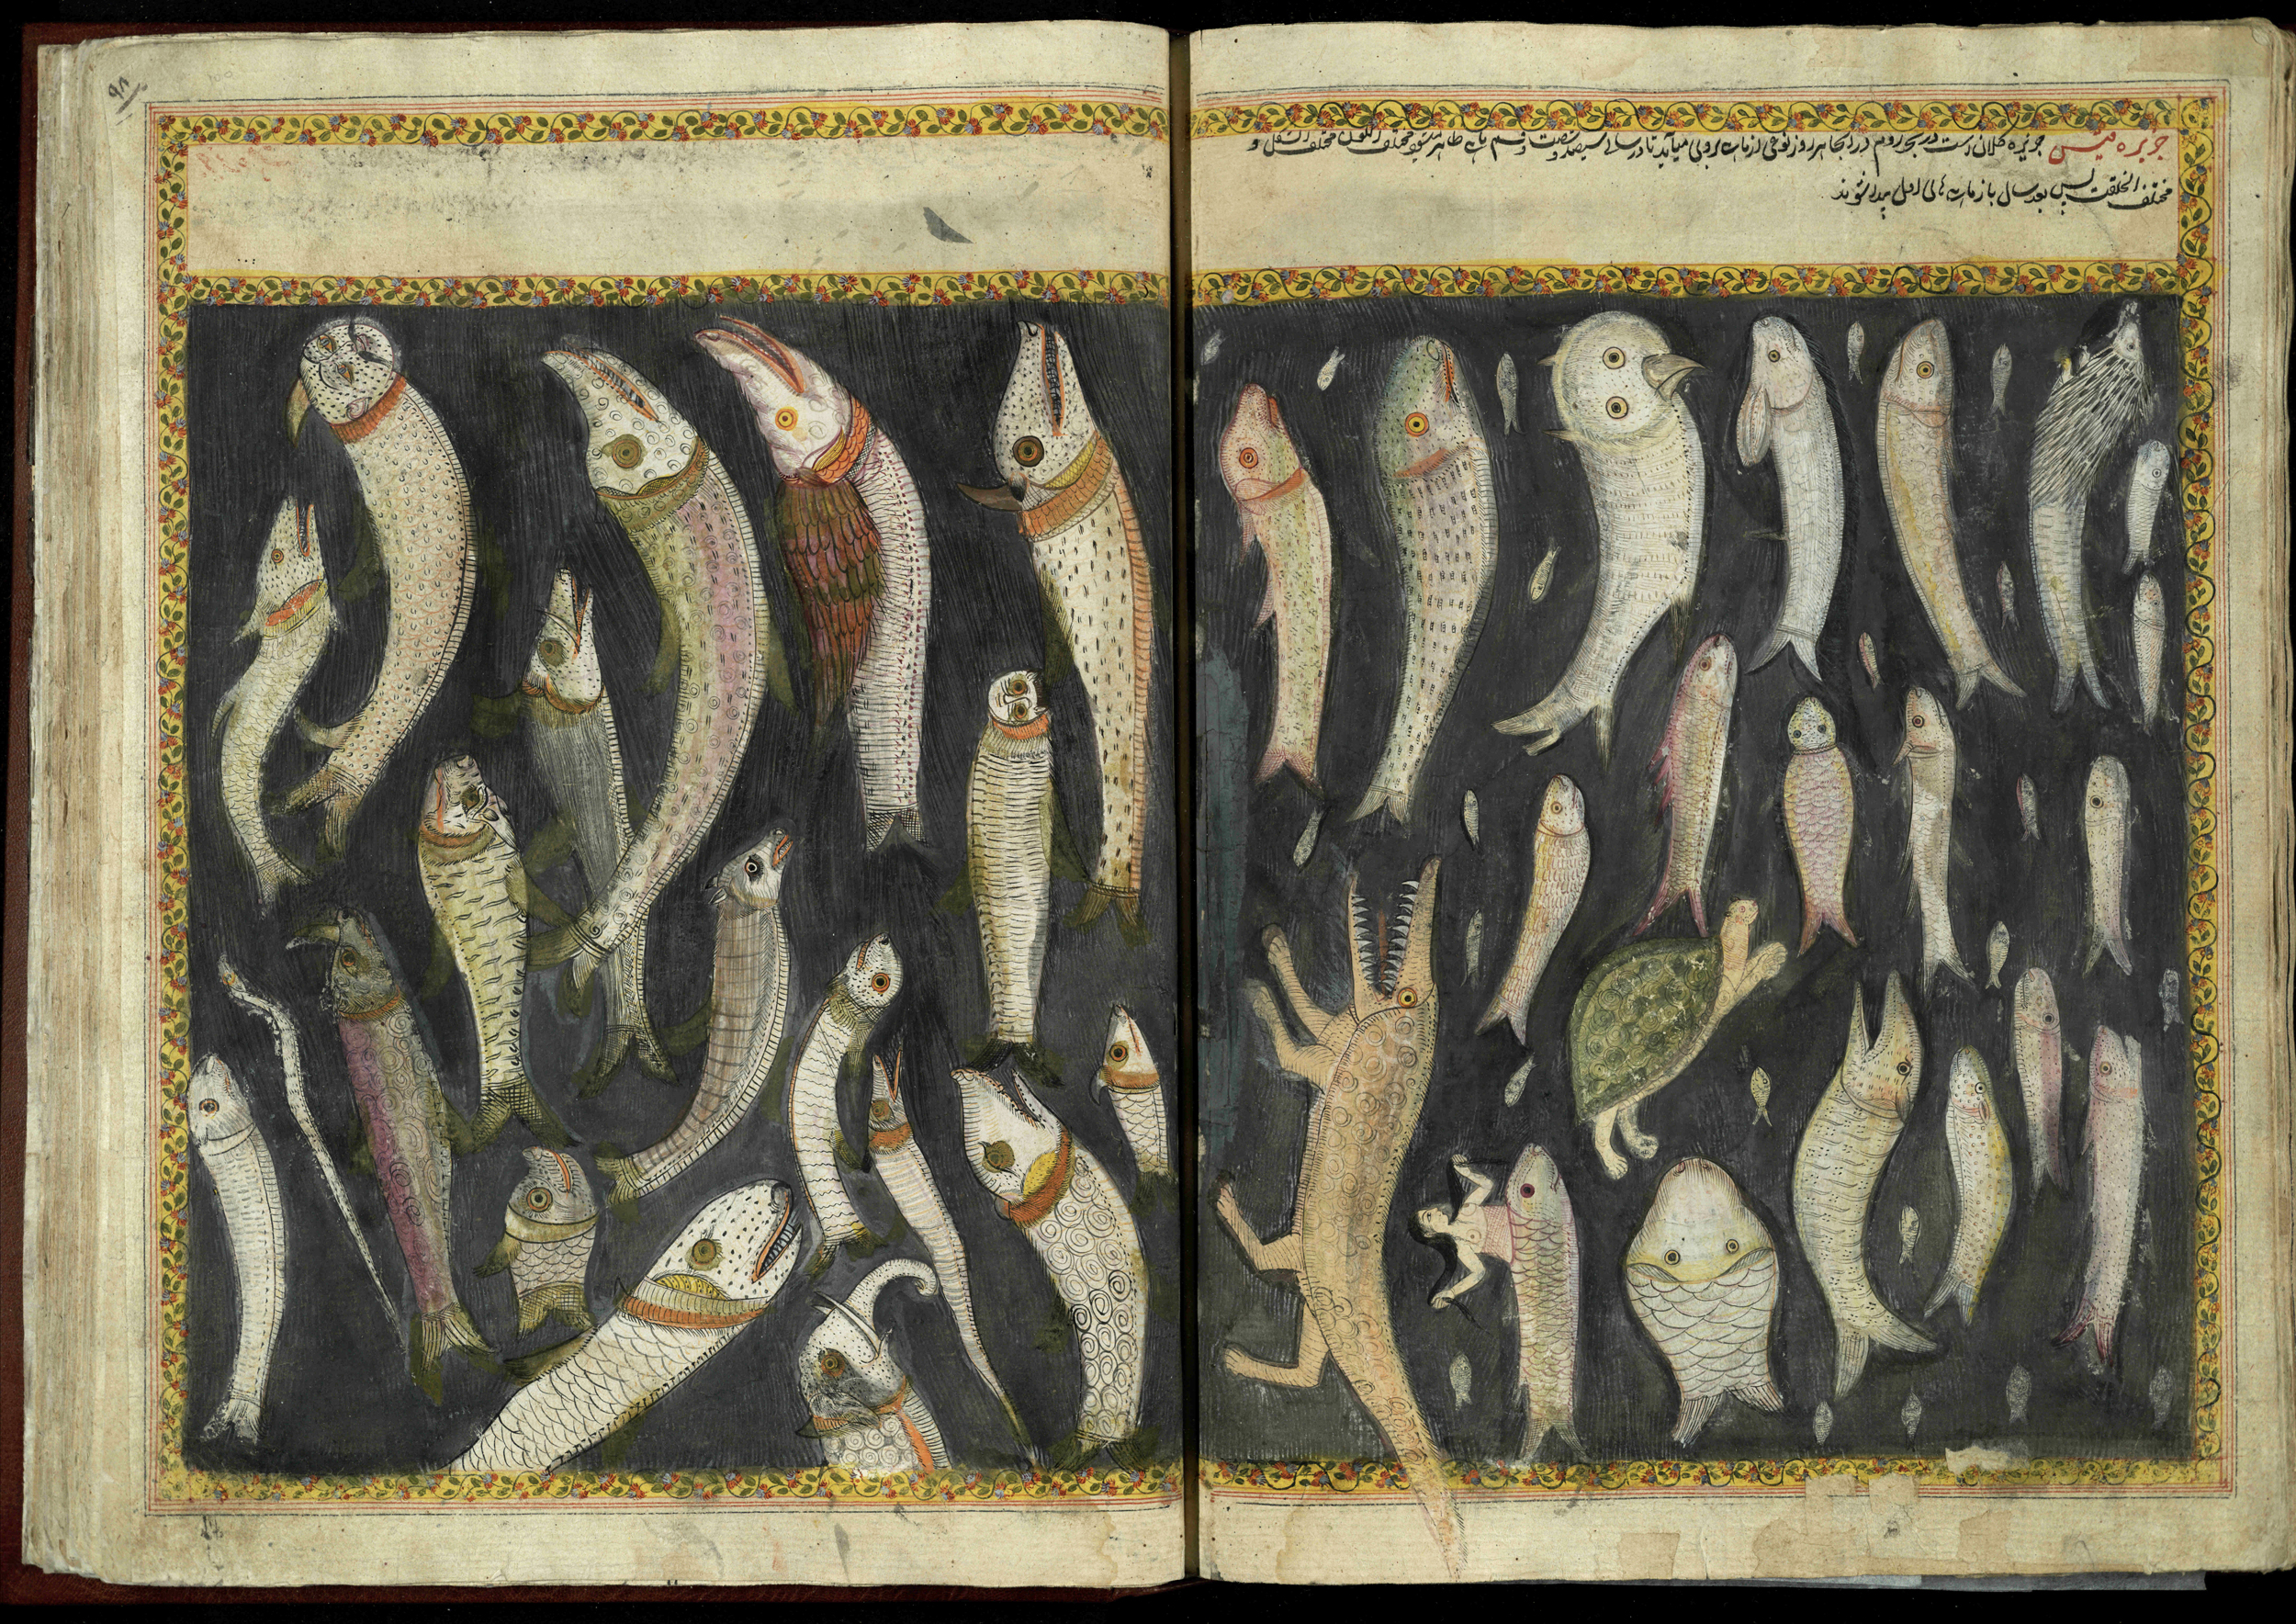 Many bizarre fish, including a hedgehog-headed fish, an owl-headed fish and a fish with a person coming out of its head! From 17th or 18th century manuscript copy of “The Book of Wonders of the Age” (St Andrews ms32(o))